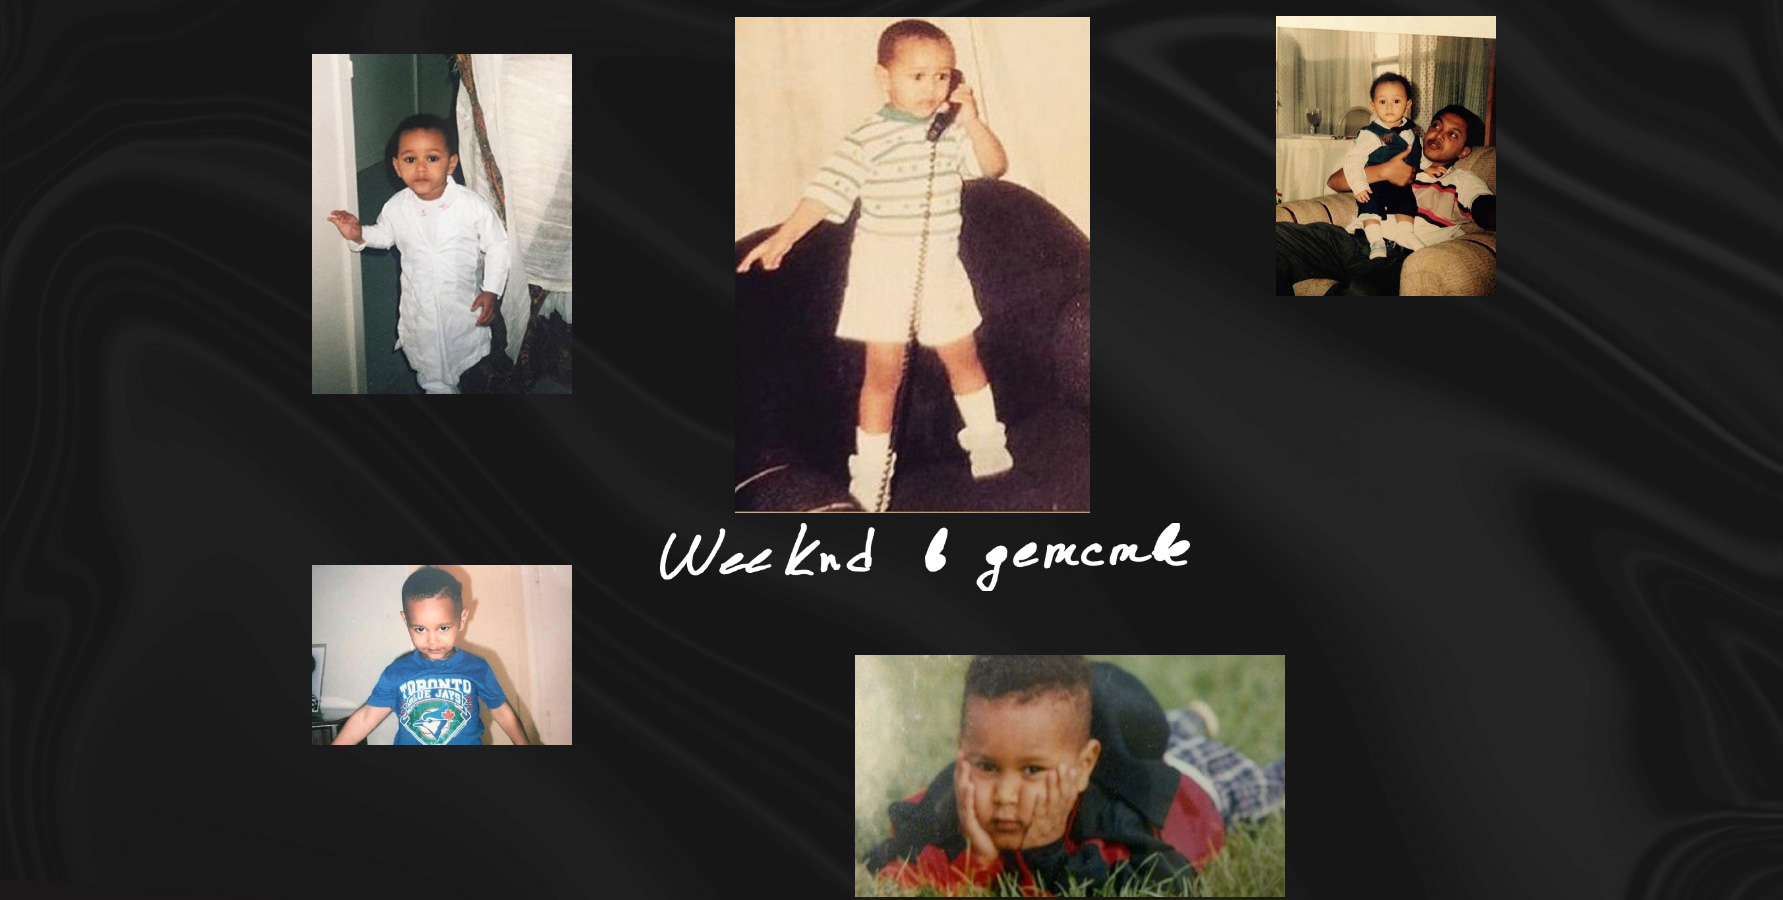 The Weeknd - Website of the Day